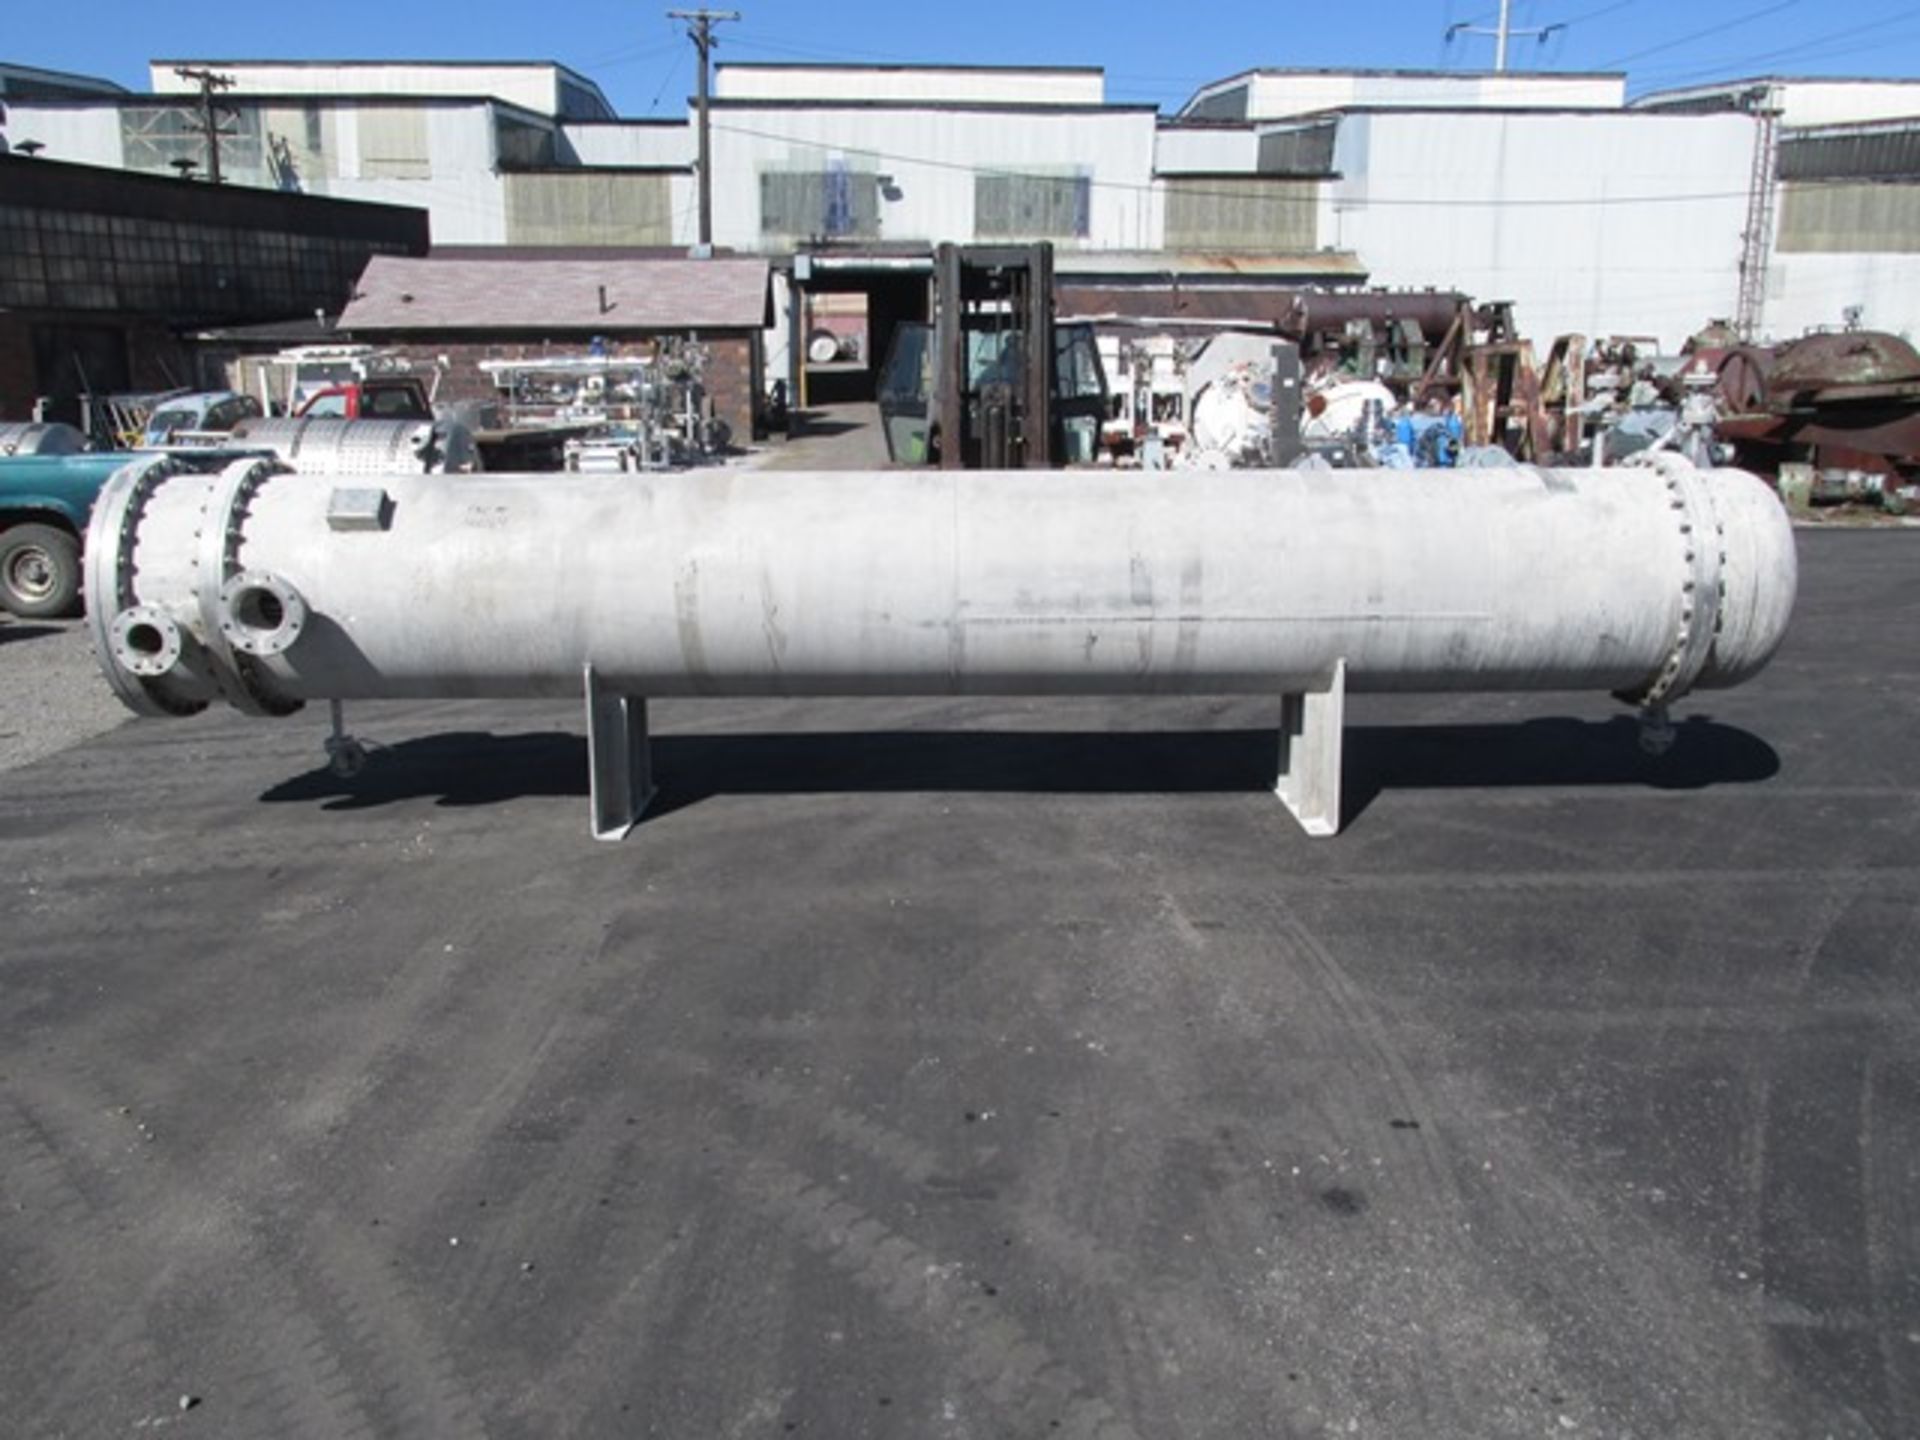 1908 sq. ft. Doyle & Roth shell and tube heat exchanger, 304 stainless steel.